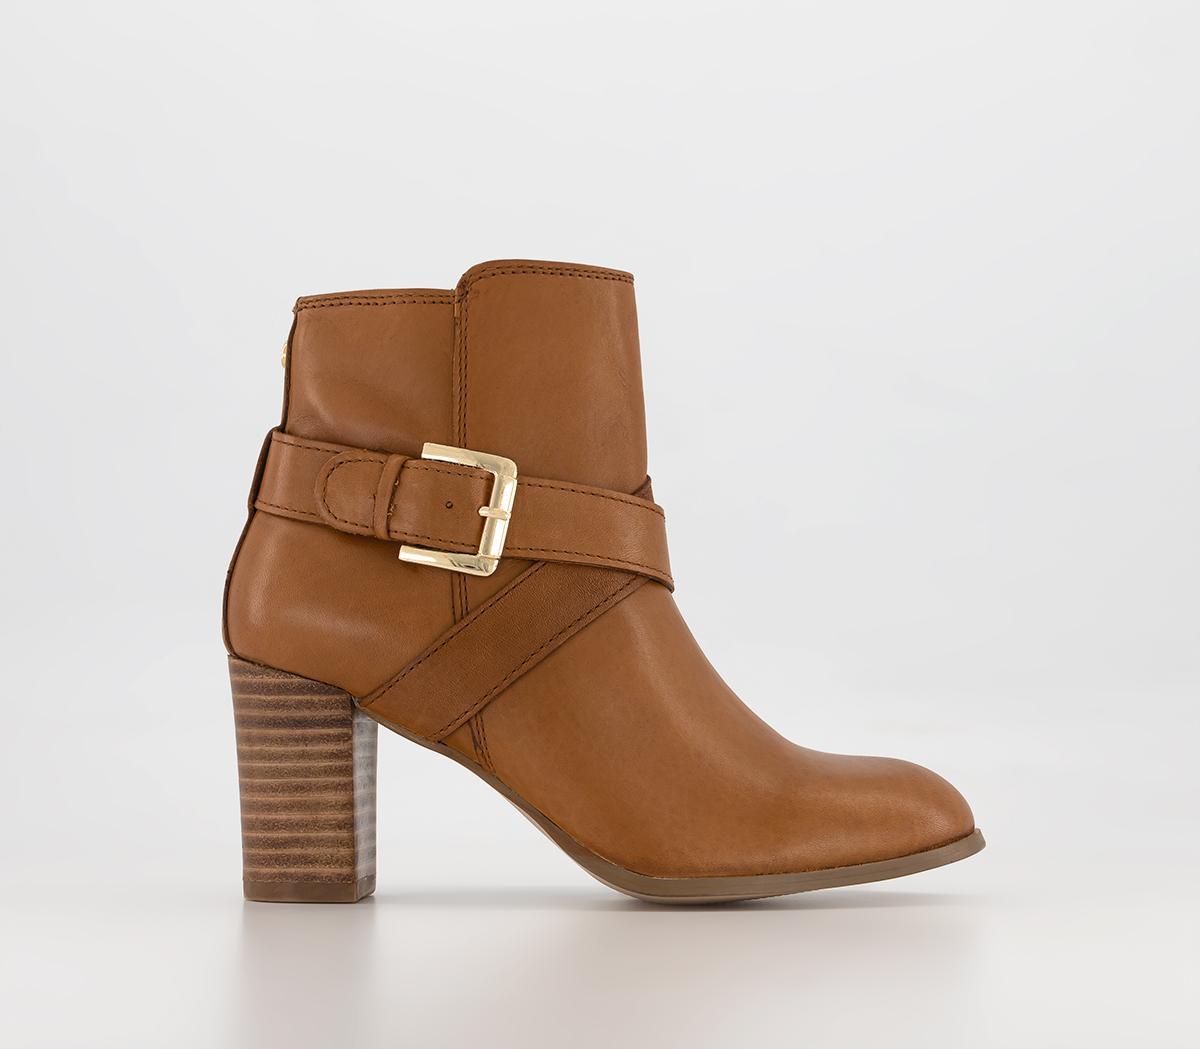 OFFICEAlma Buckle Strap Ankle BootsTan Leather